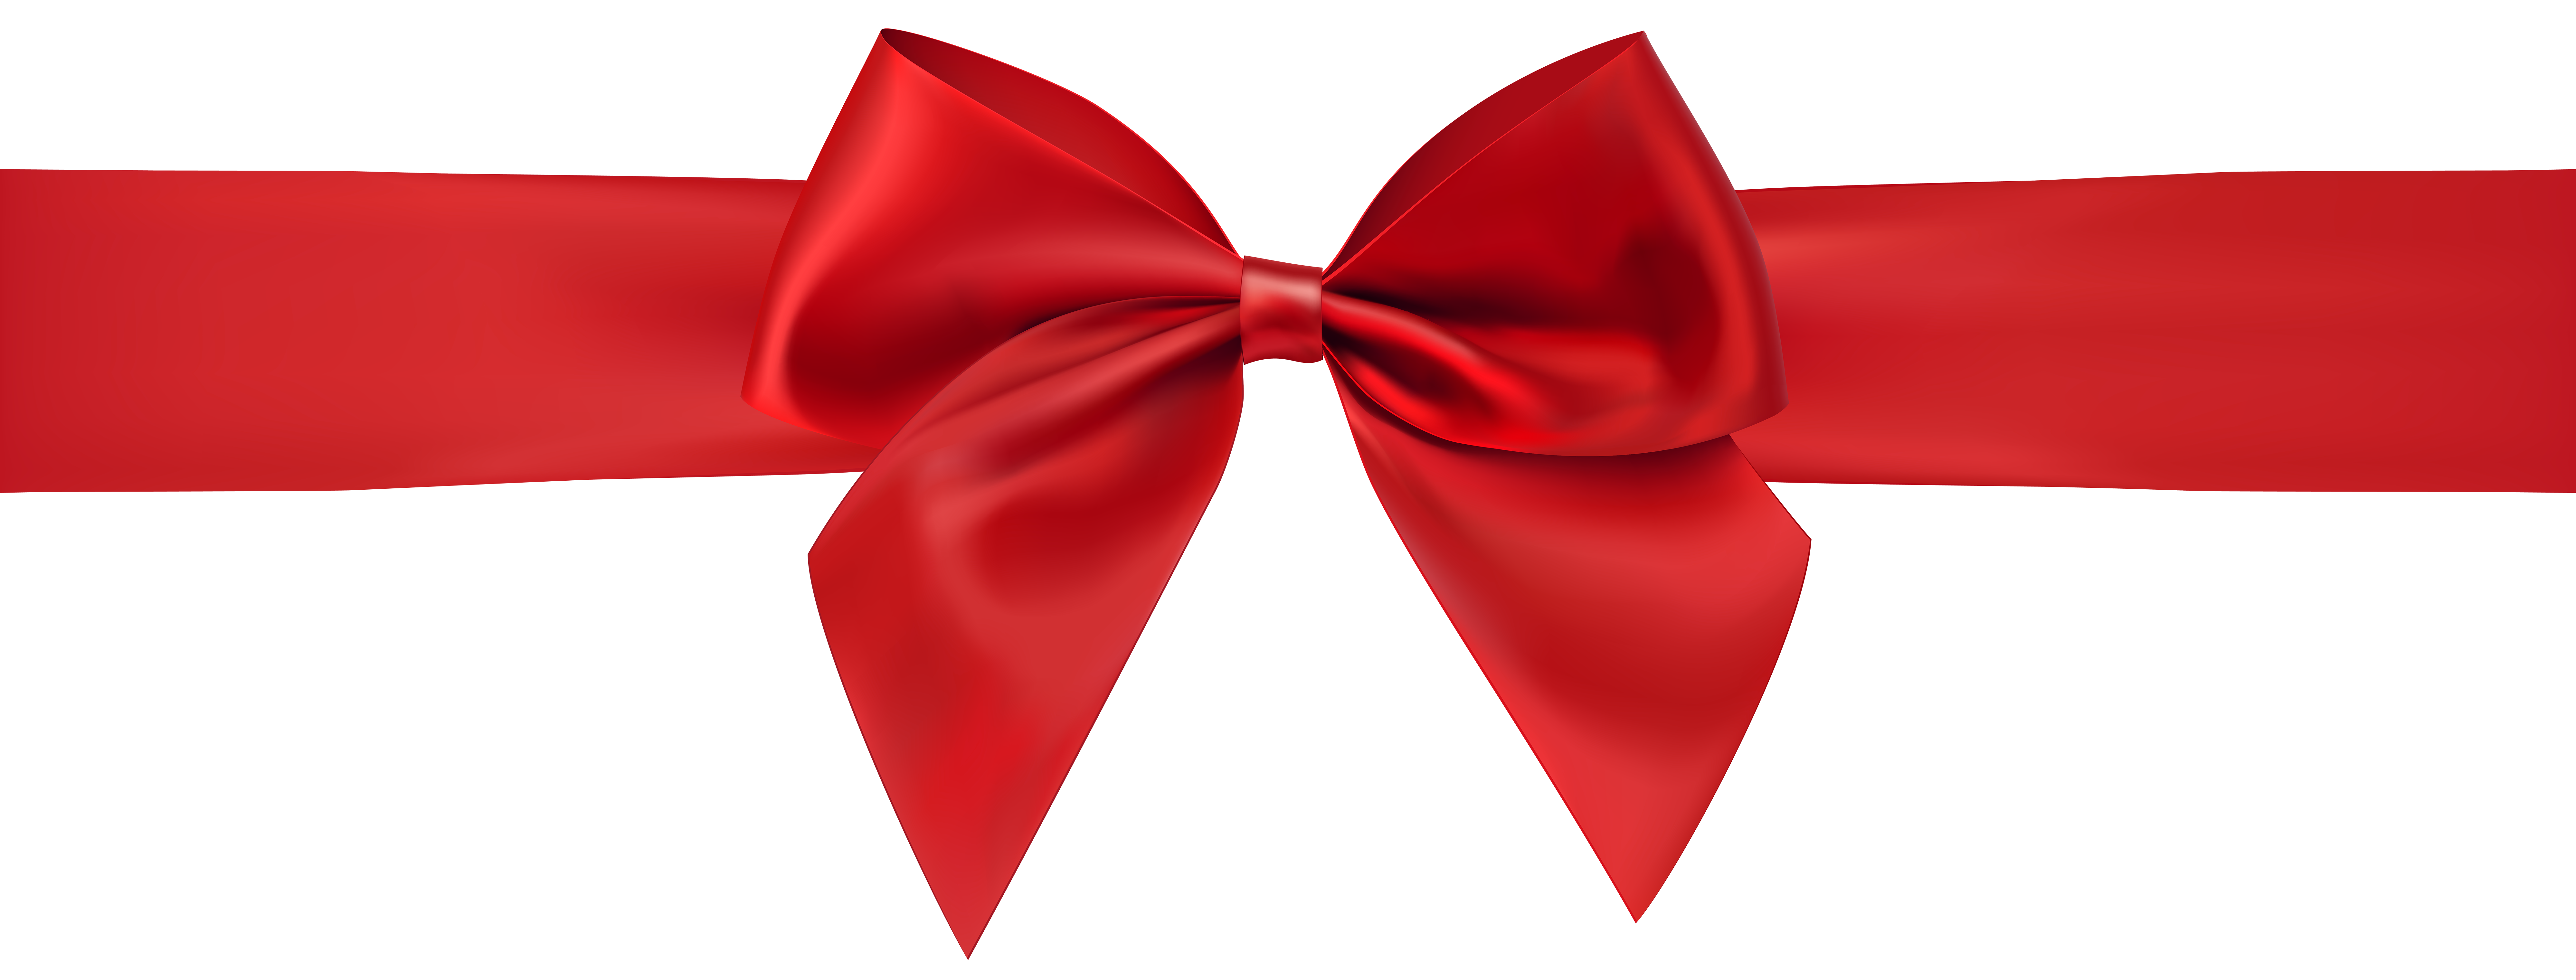 Red Bow Banner